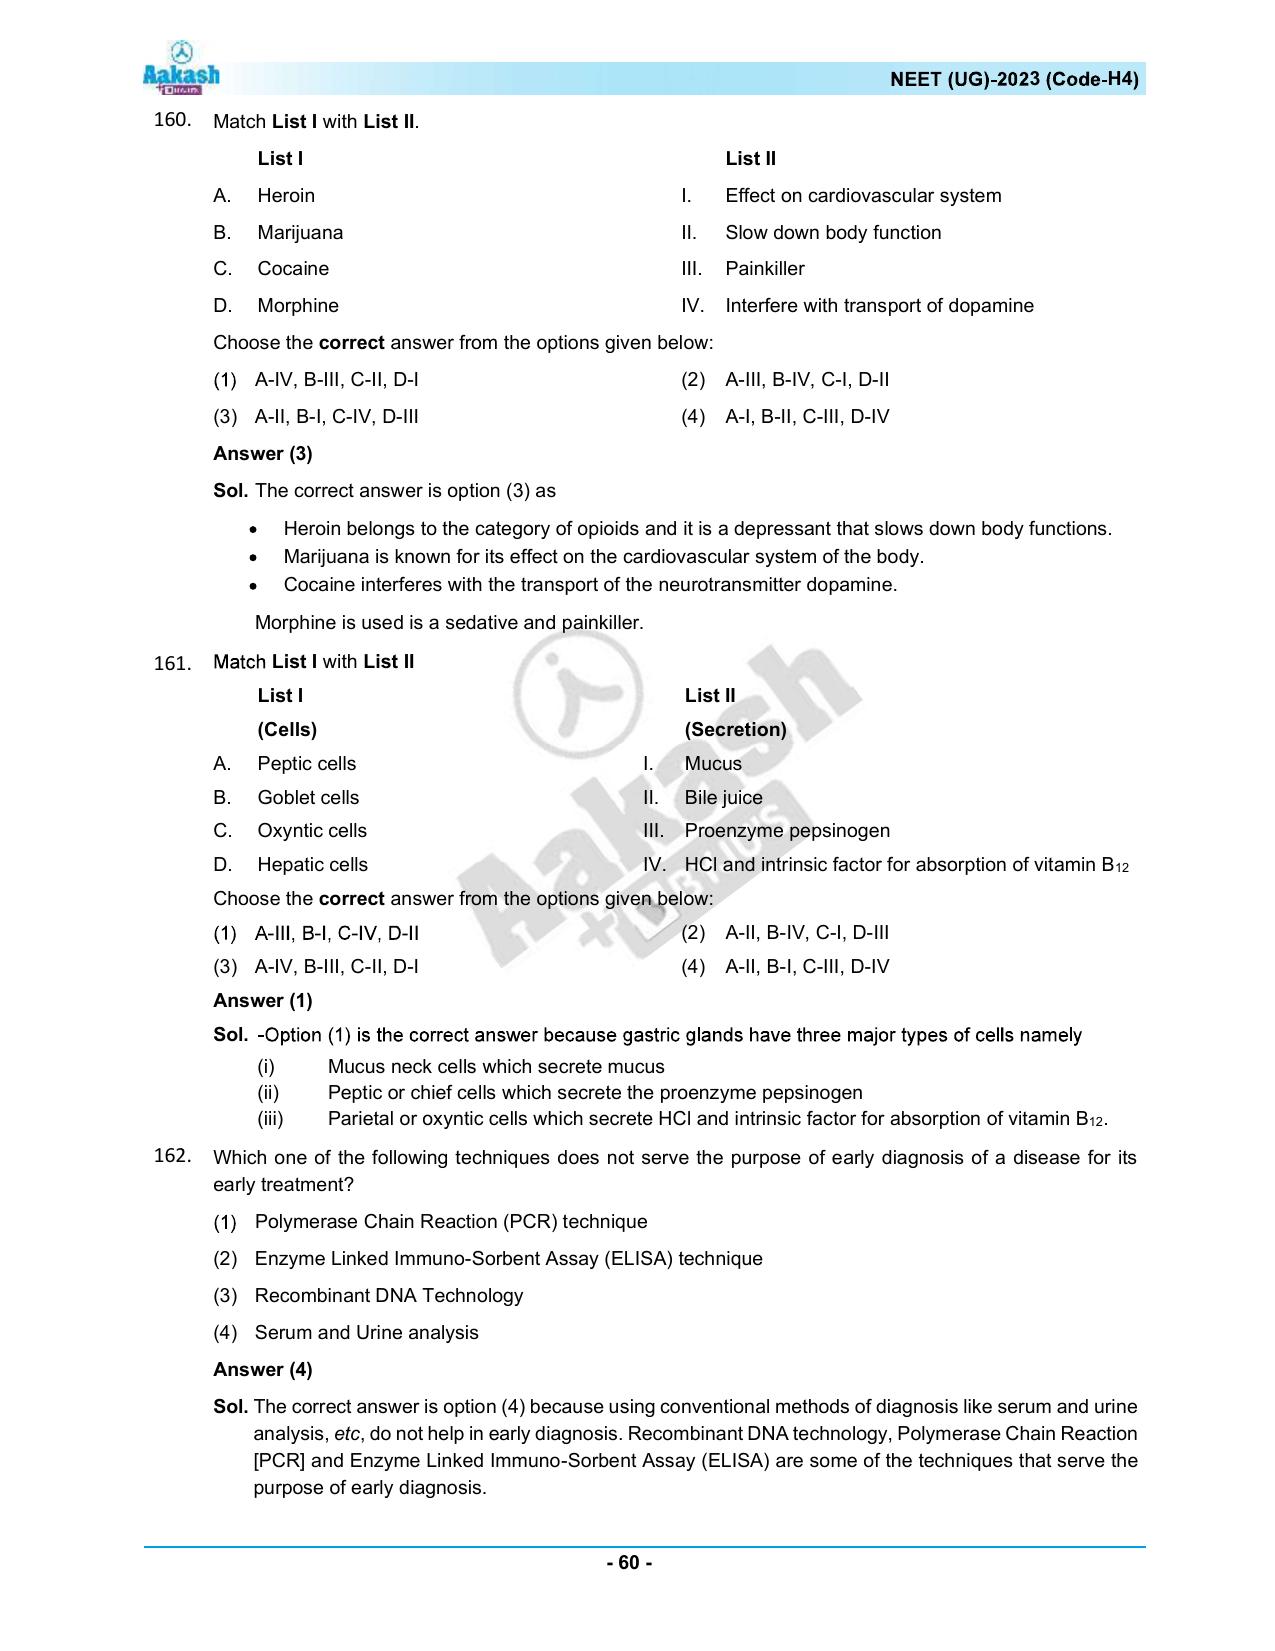 NEET 2023 Question Paper H4 - Page 60